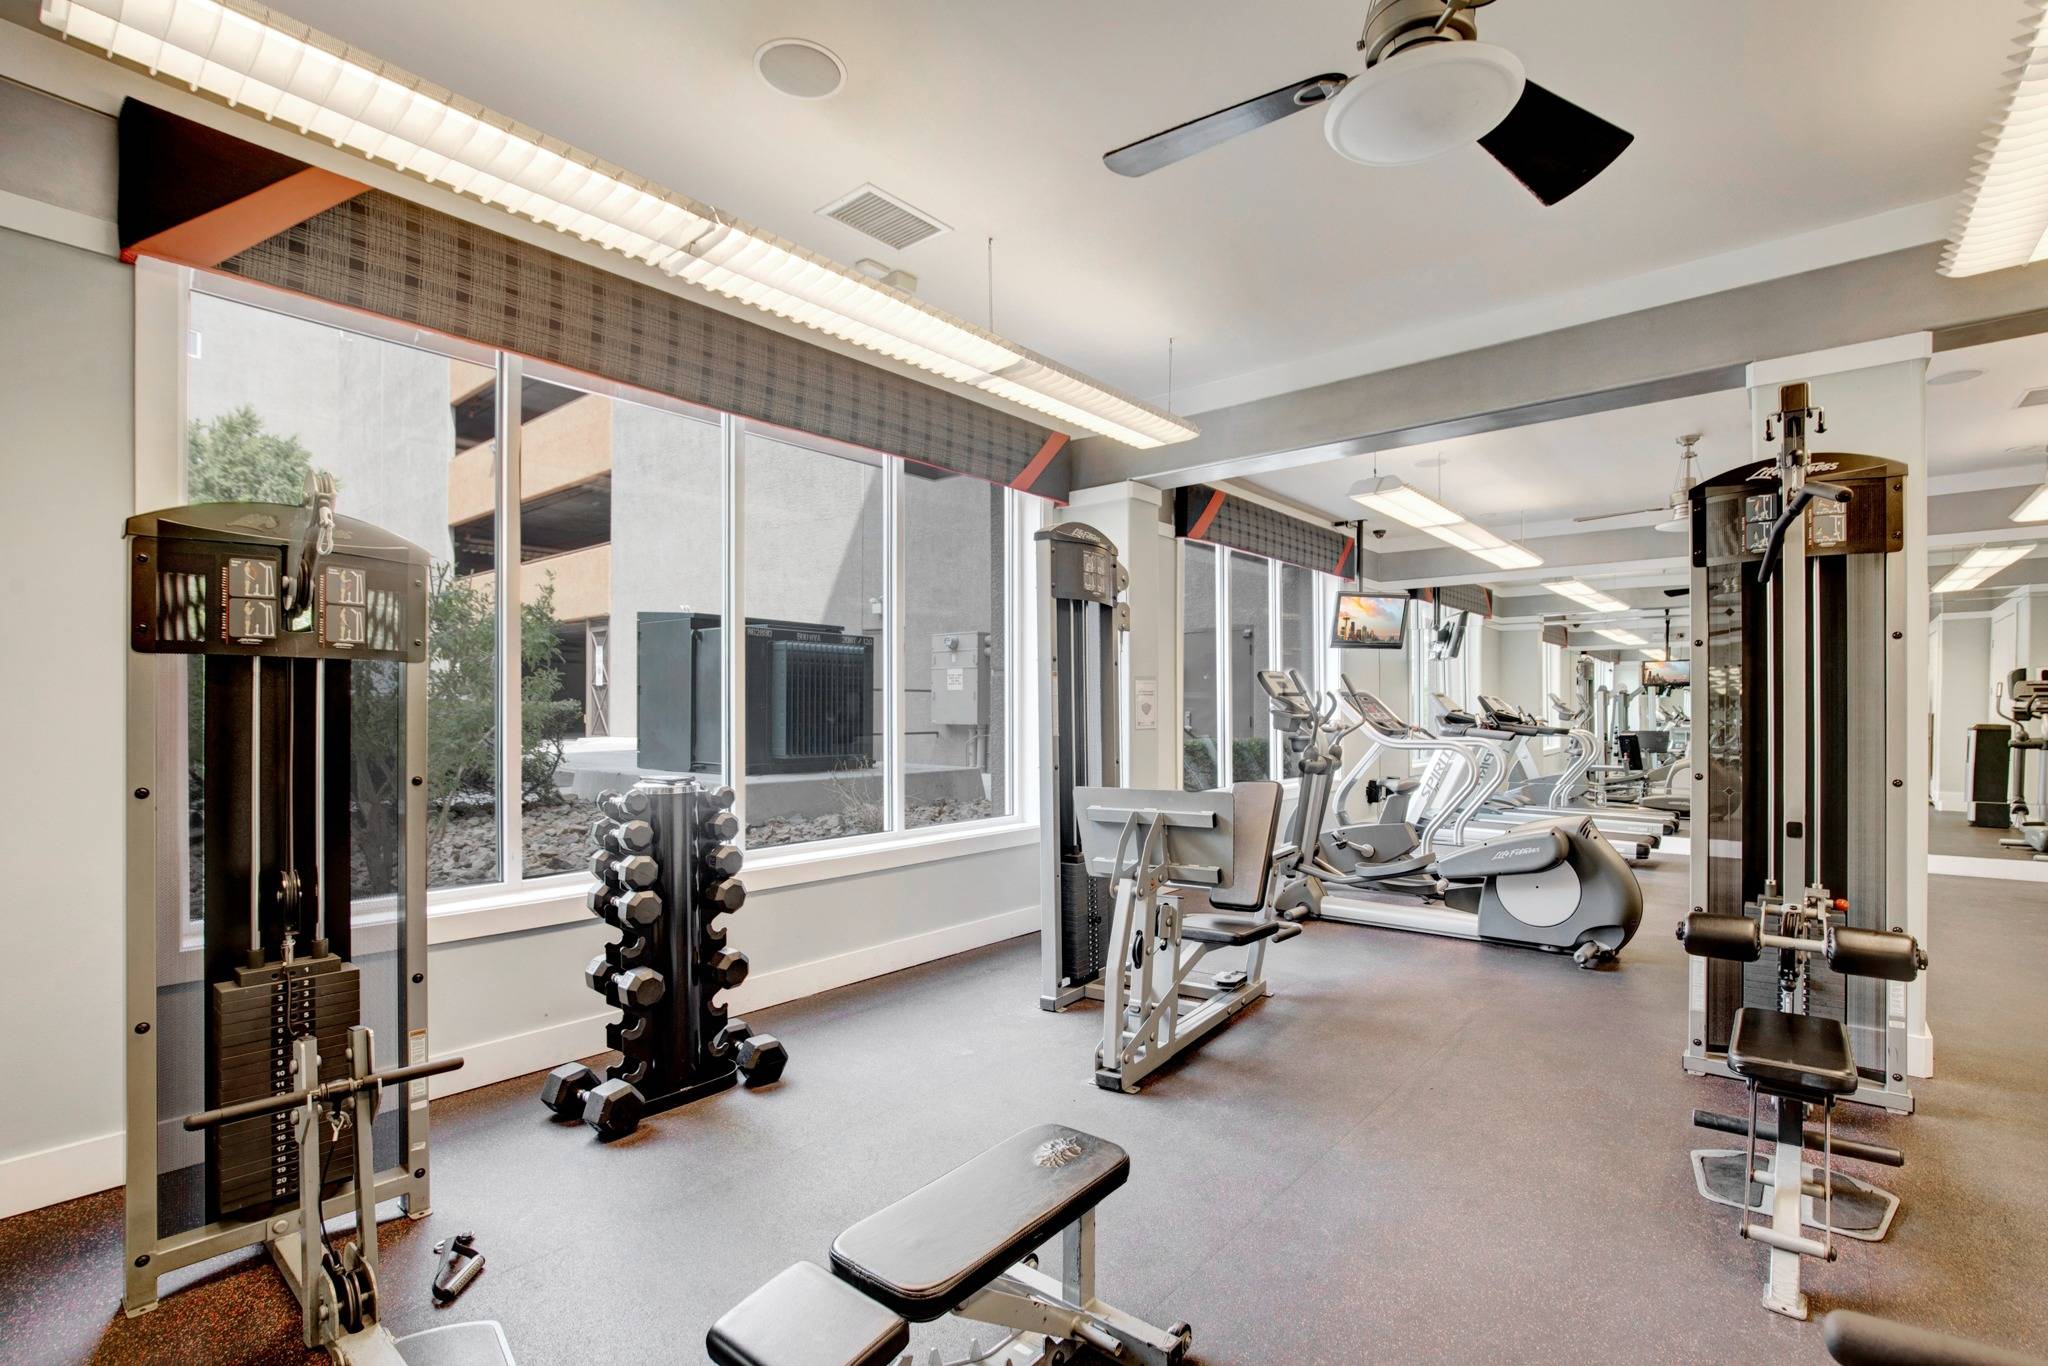 24-hour Fitness Center with Cardio and Strength Equipment